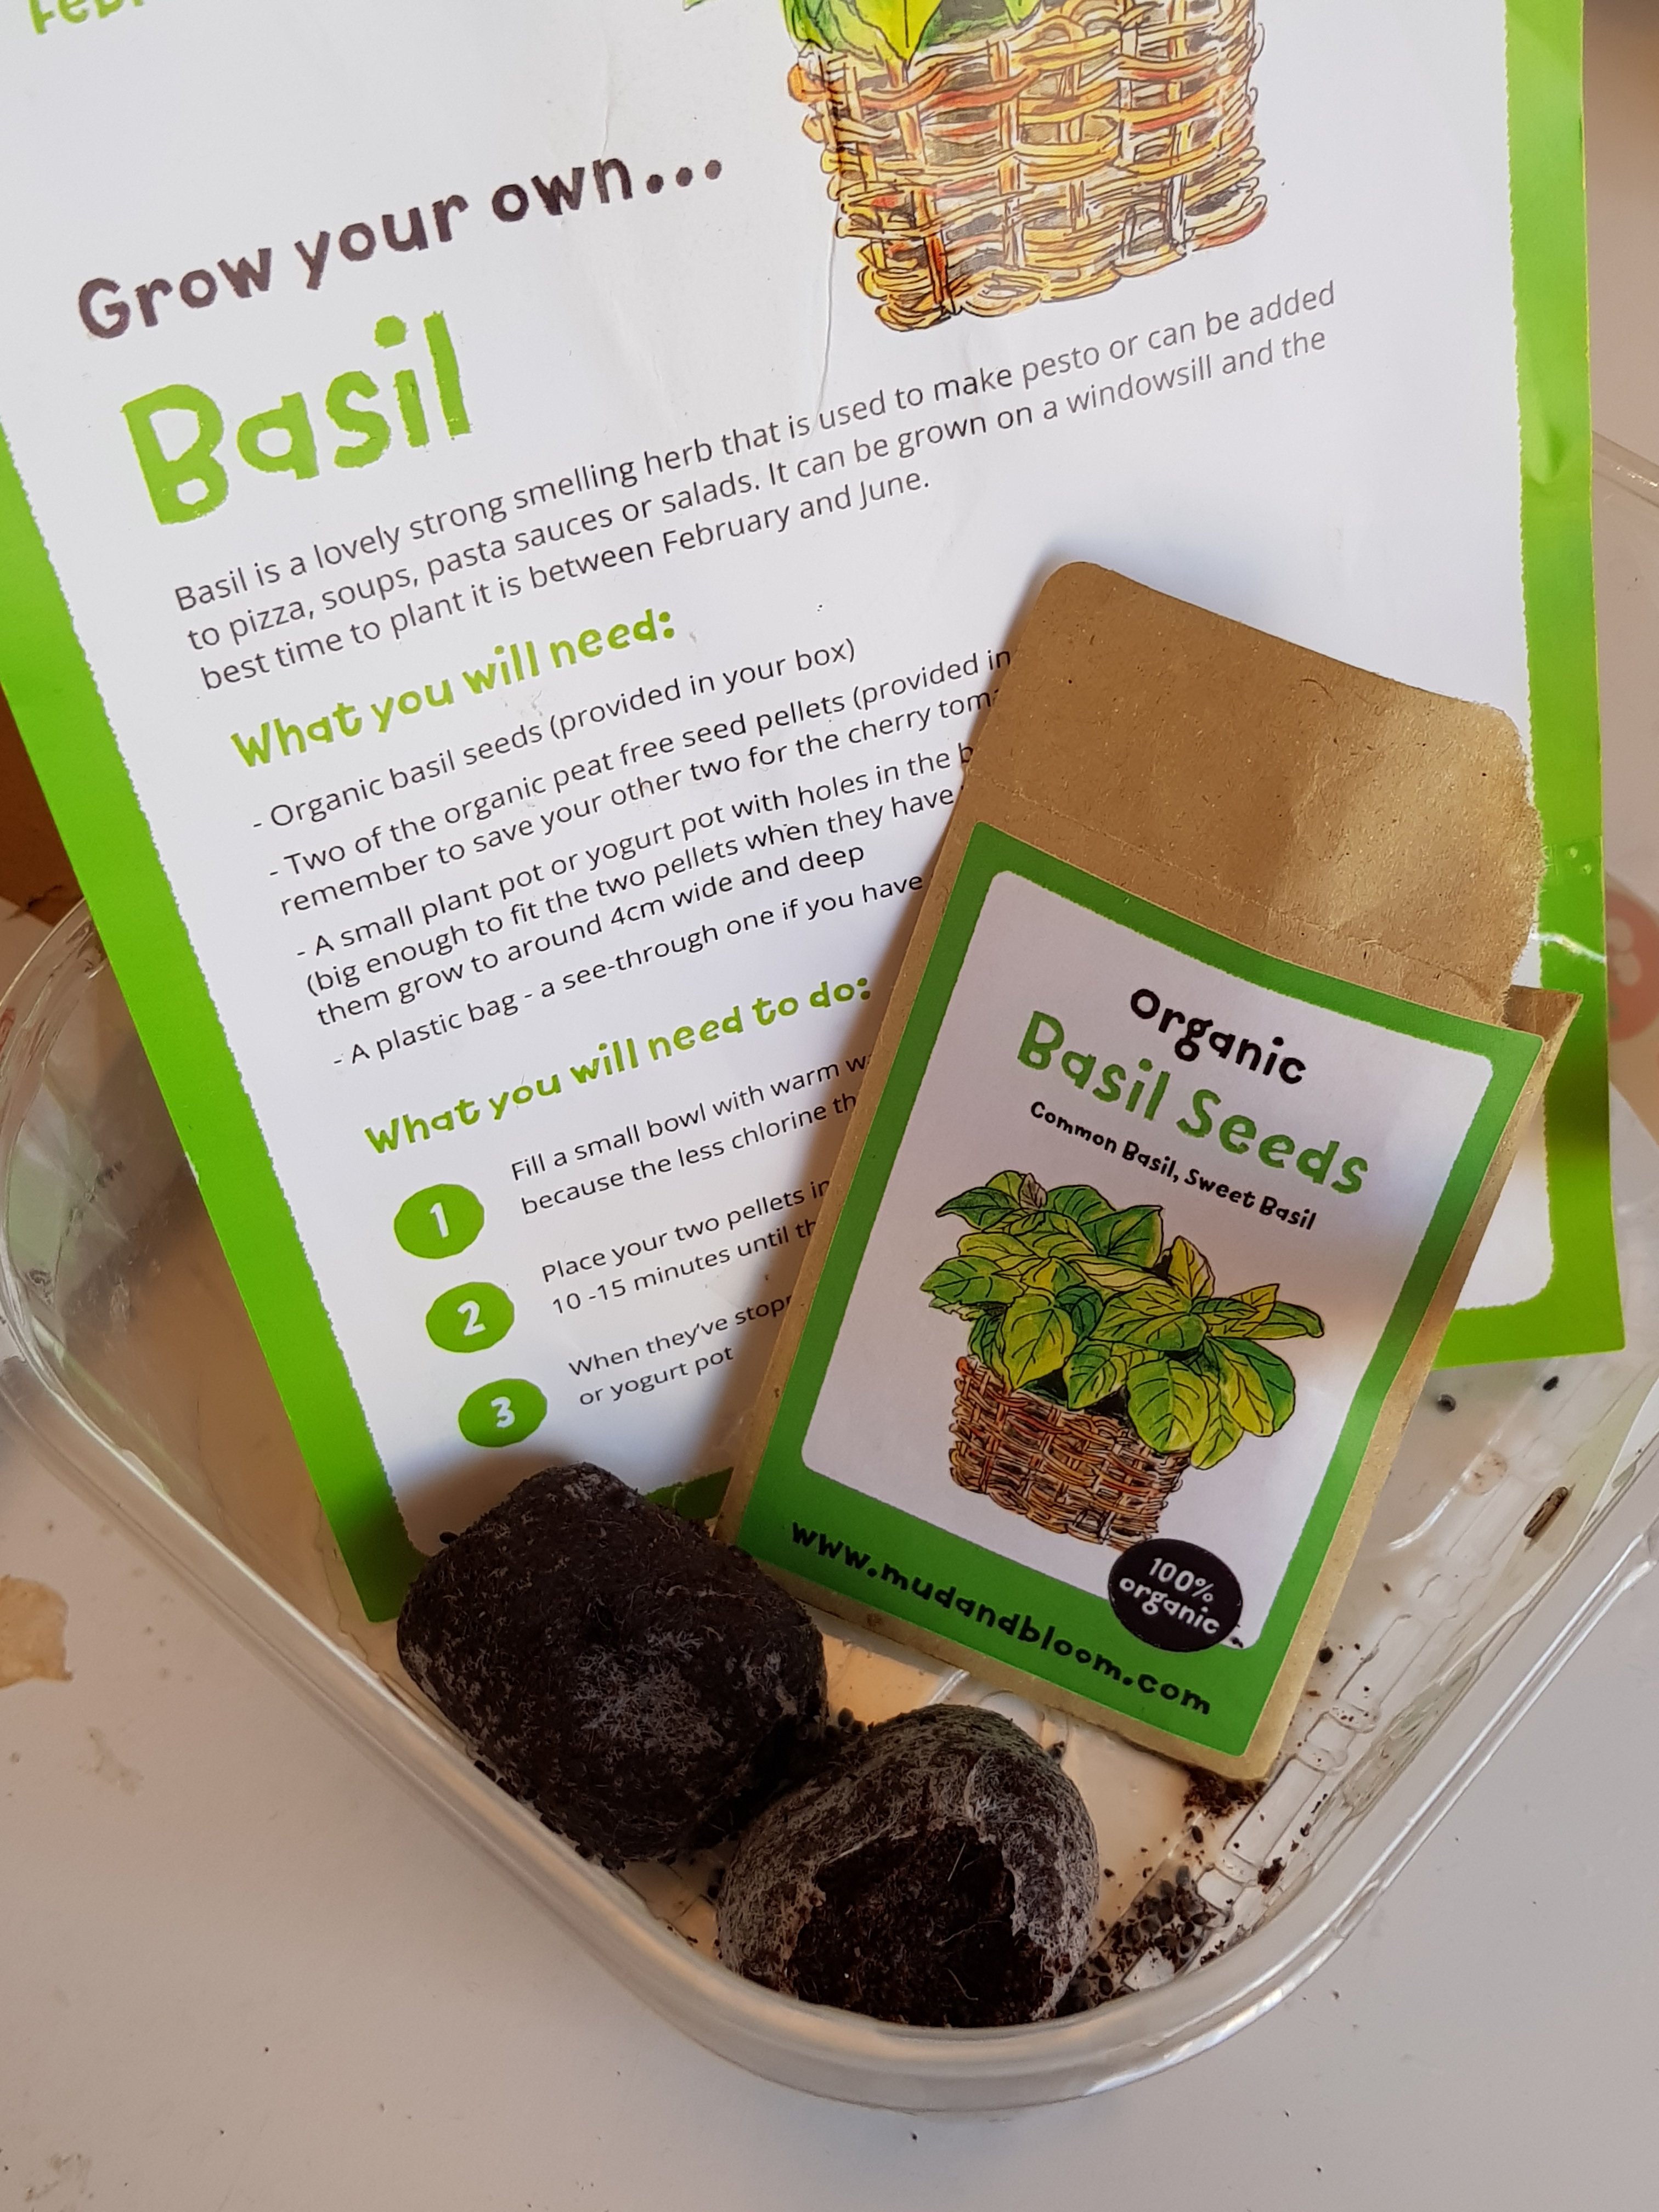 Grow your own basil - mud and bloom - packet of seeds and instruction card image.